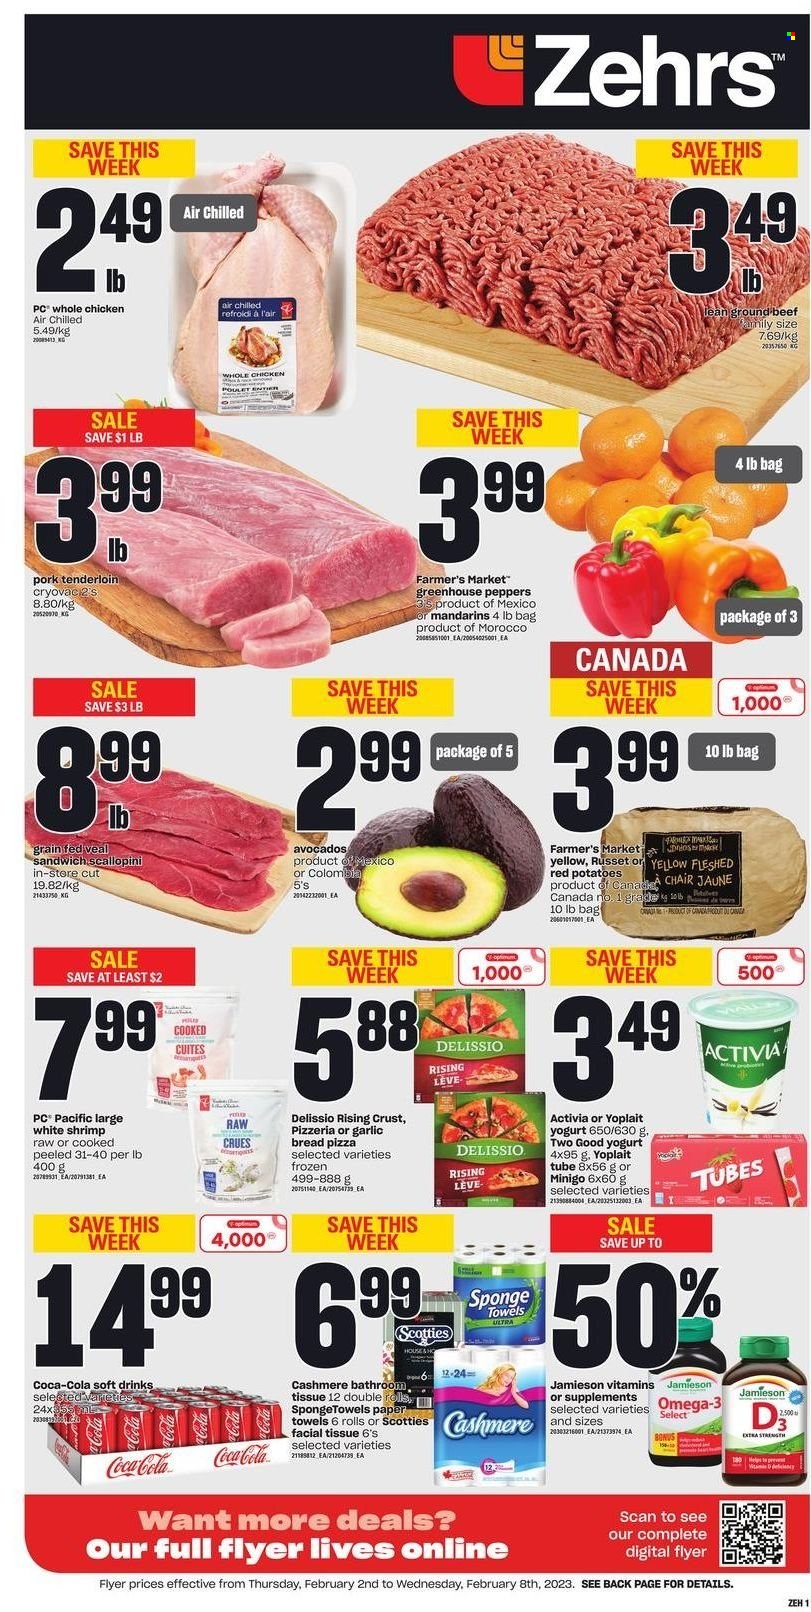 thumbnail - Zehrs Flyer - February 02, 2023 - February 08, 2023 - Sales products - chair, bread, russet potatoes, potatoes, peppers, red potatoes, avocado, mandarines, shrimps, pizza, sandwich, yoghurt, Activia, Yoplait, Coca-Cola, soft drink, whole chicken, chicken, beef meat, ground beef, pork meat, pork tenderloin, tissues, kitchen towels, paper towels, sponge, Optimum, greenhouse, Omega-3. Page 1.